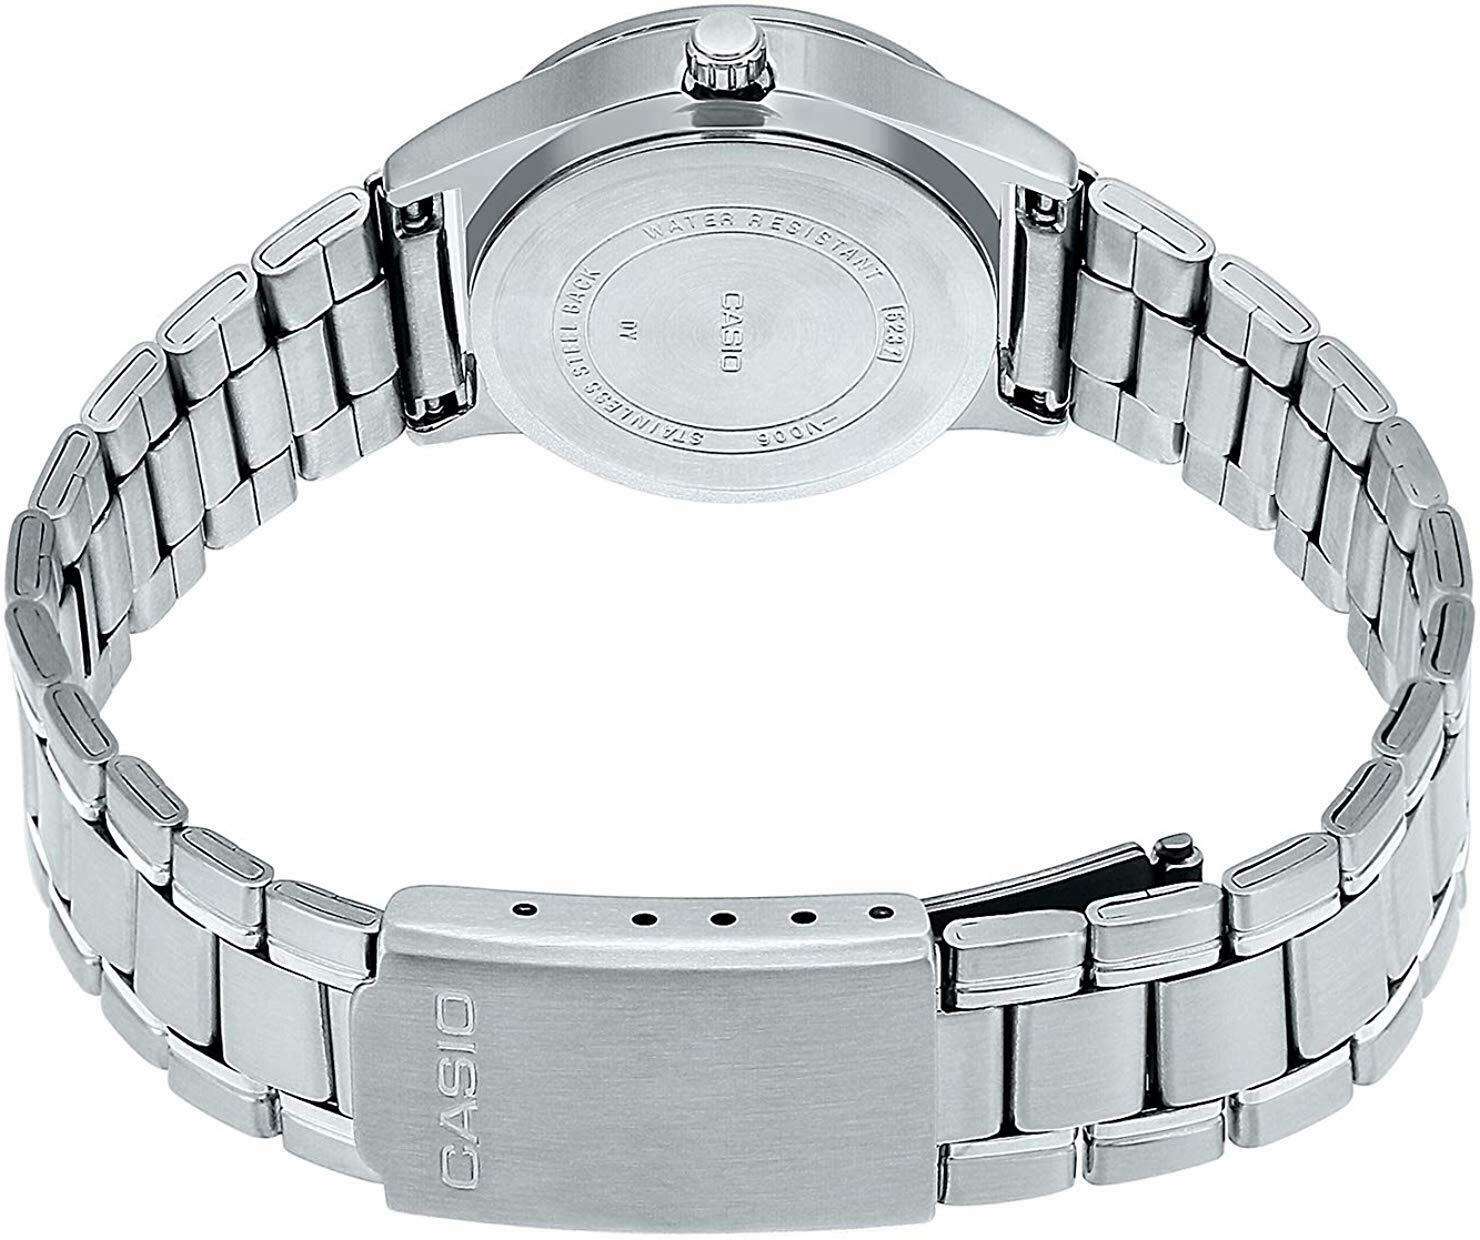 Casio LTP-V006D-1B2 Silver Stainless Watch for Women-Watch Portal Philippines